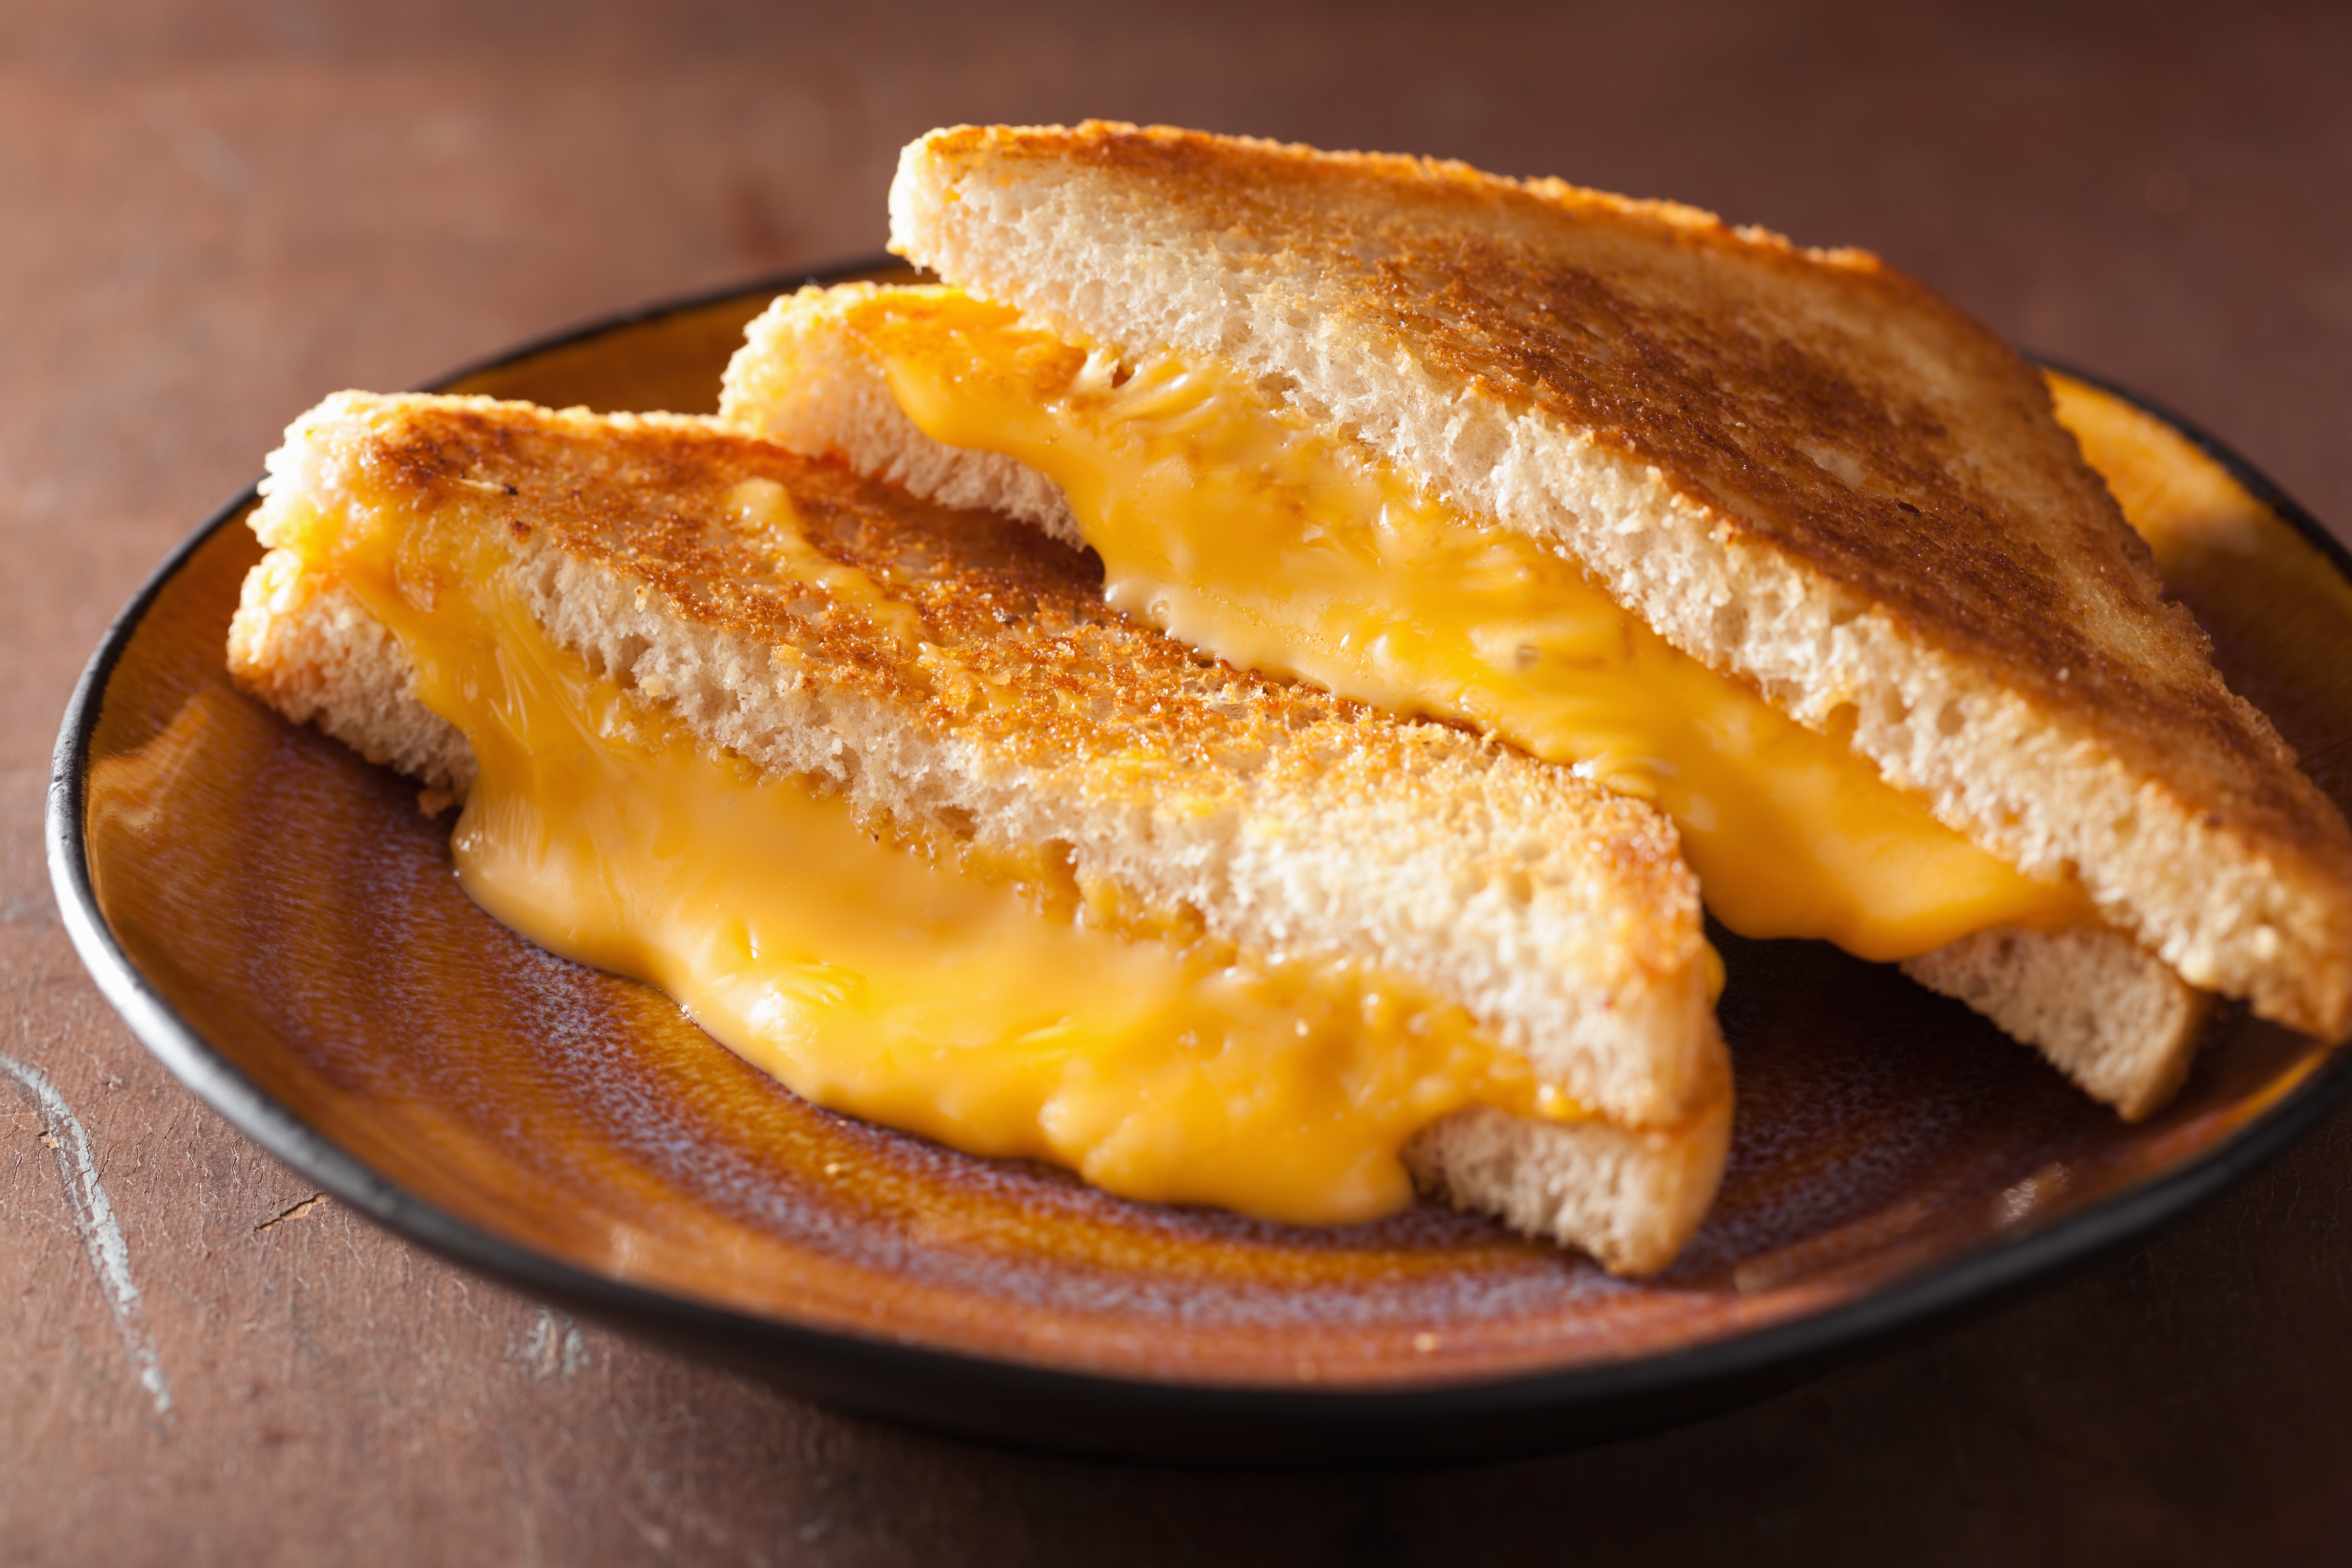 American Cheese Sales Are Melting Away. Here’s Why